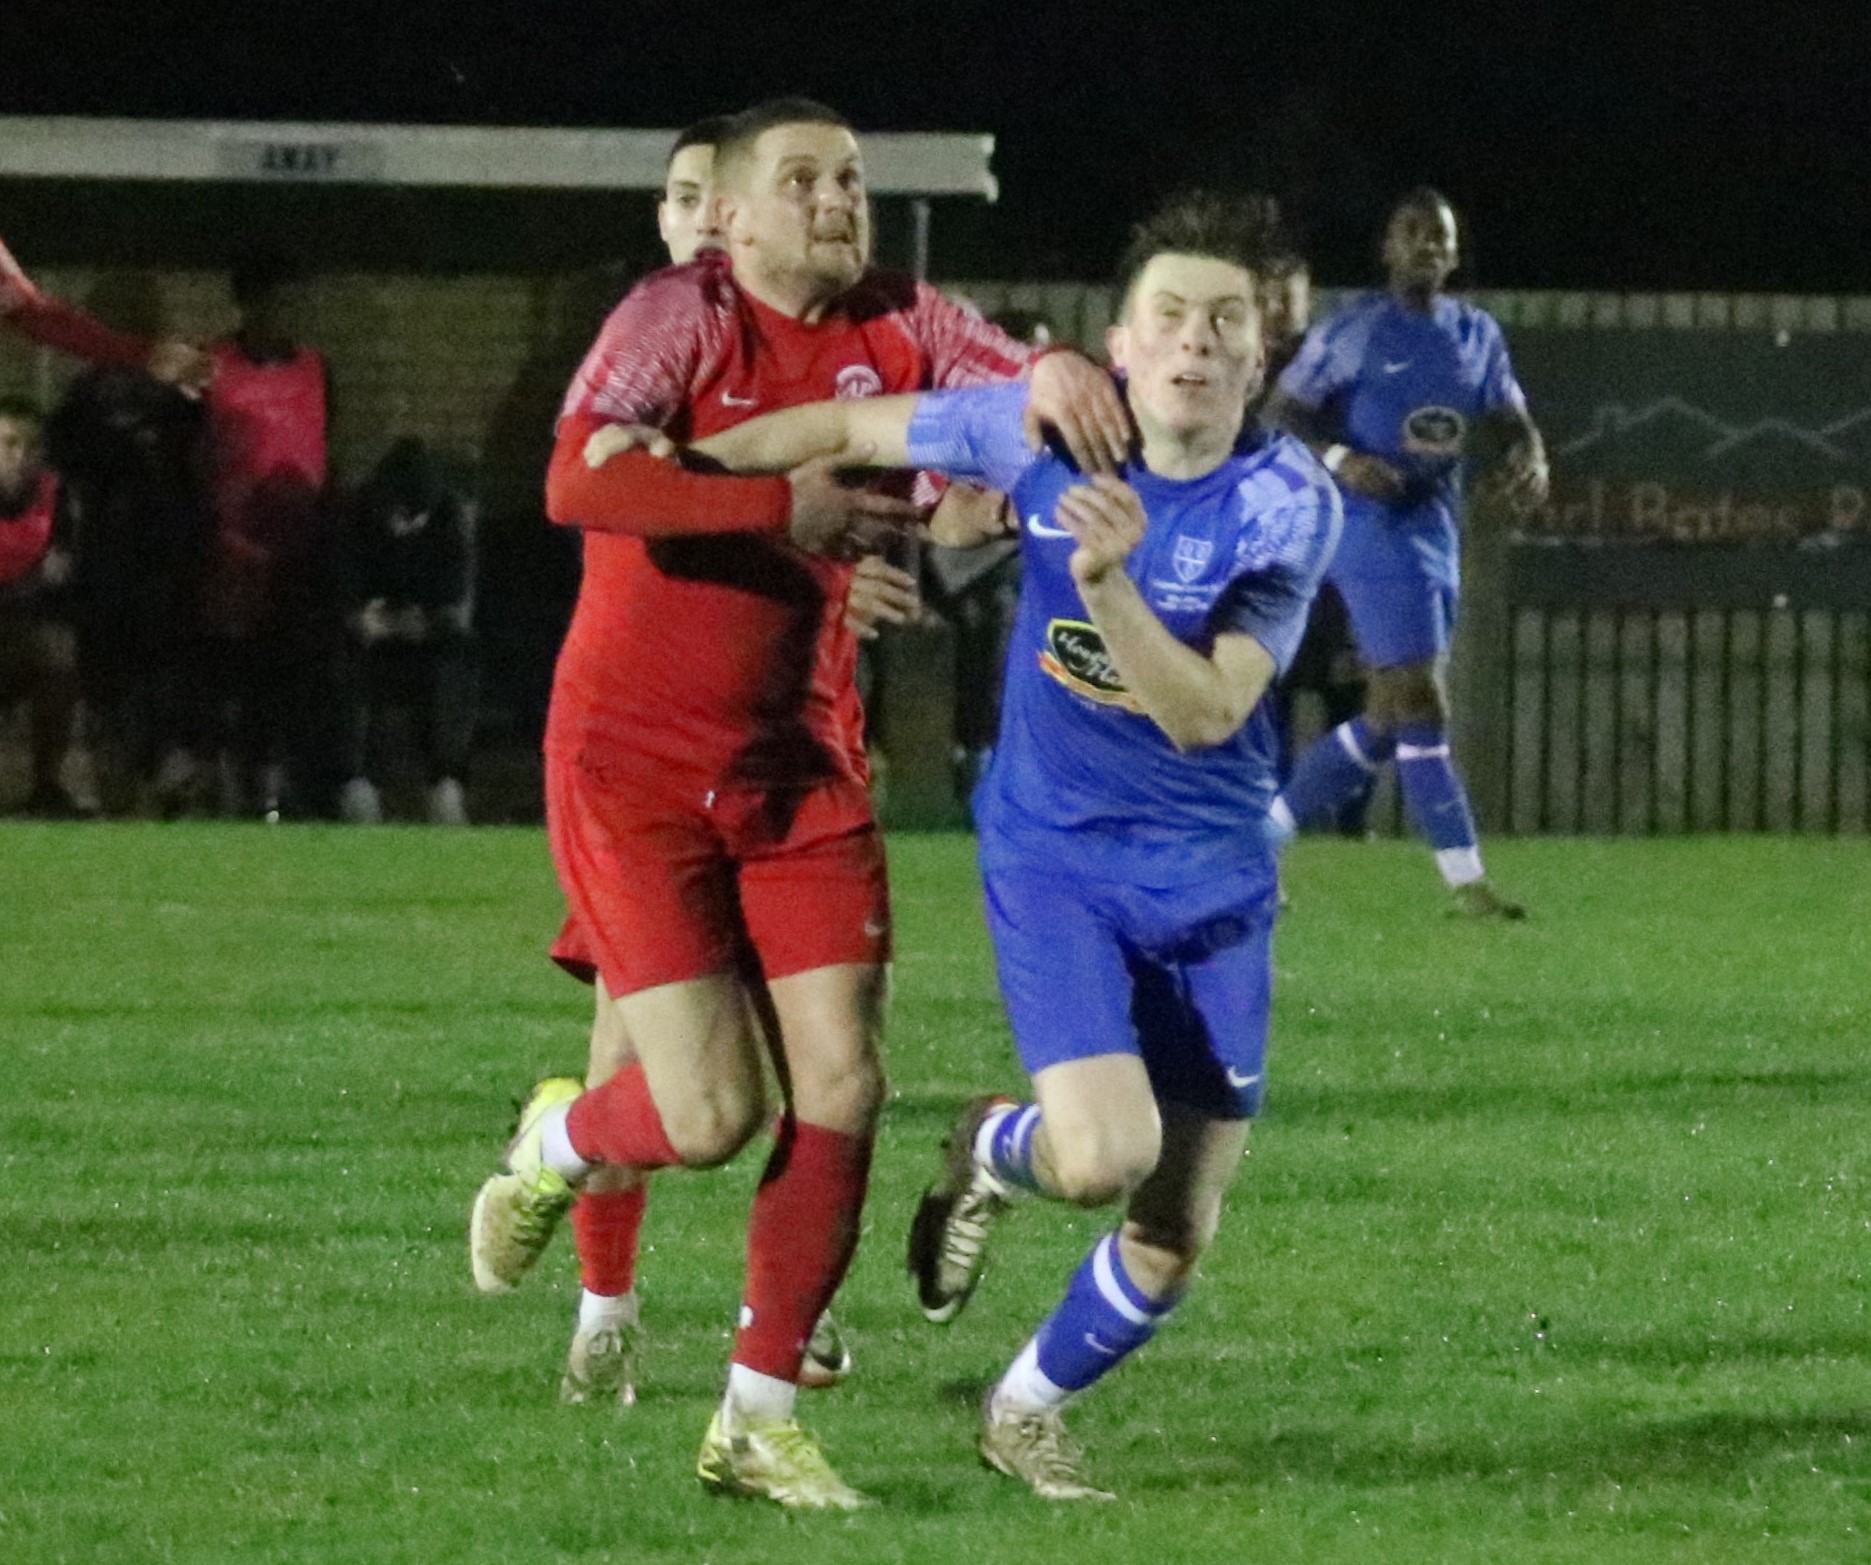 AYLESTONE TAKE THE POINTS ON AN INTERESTING EVENING AT COMPTON PARK